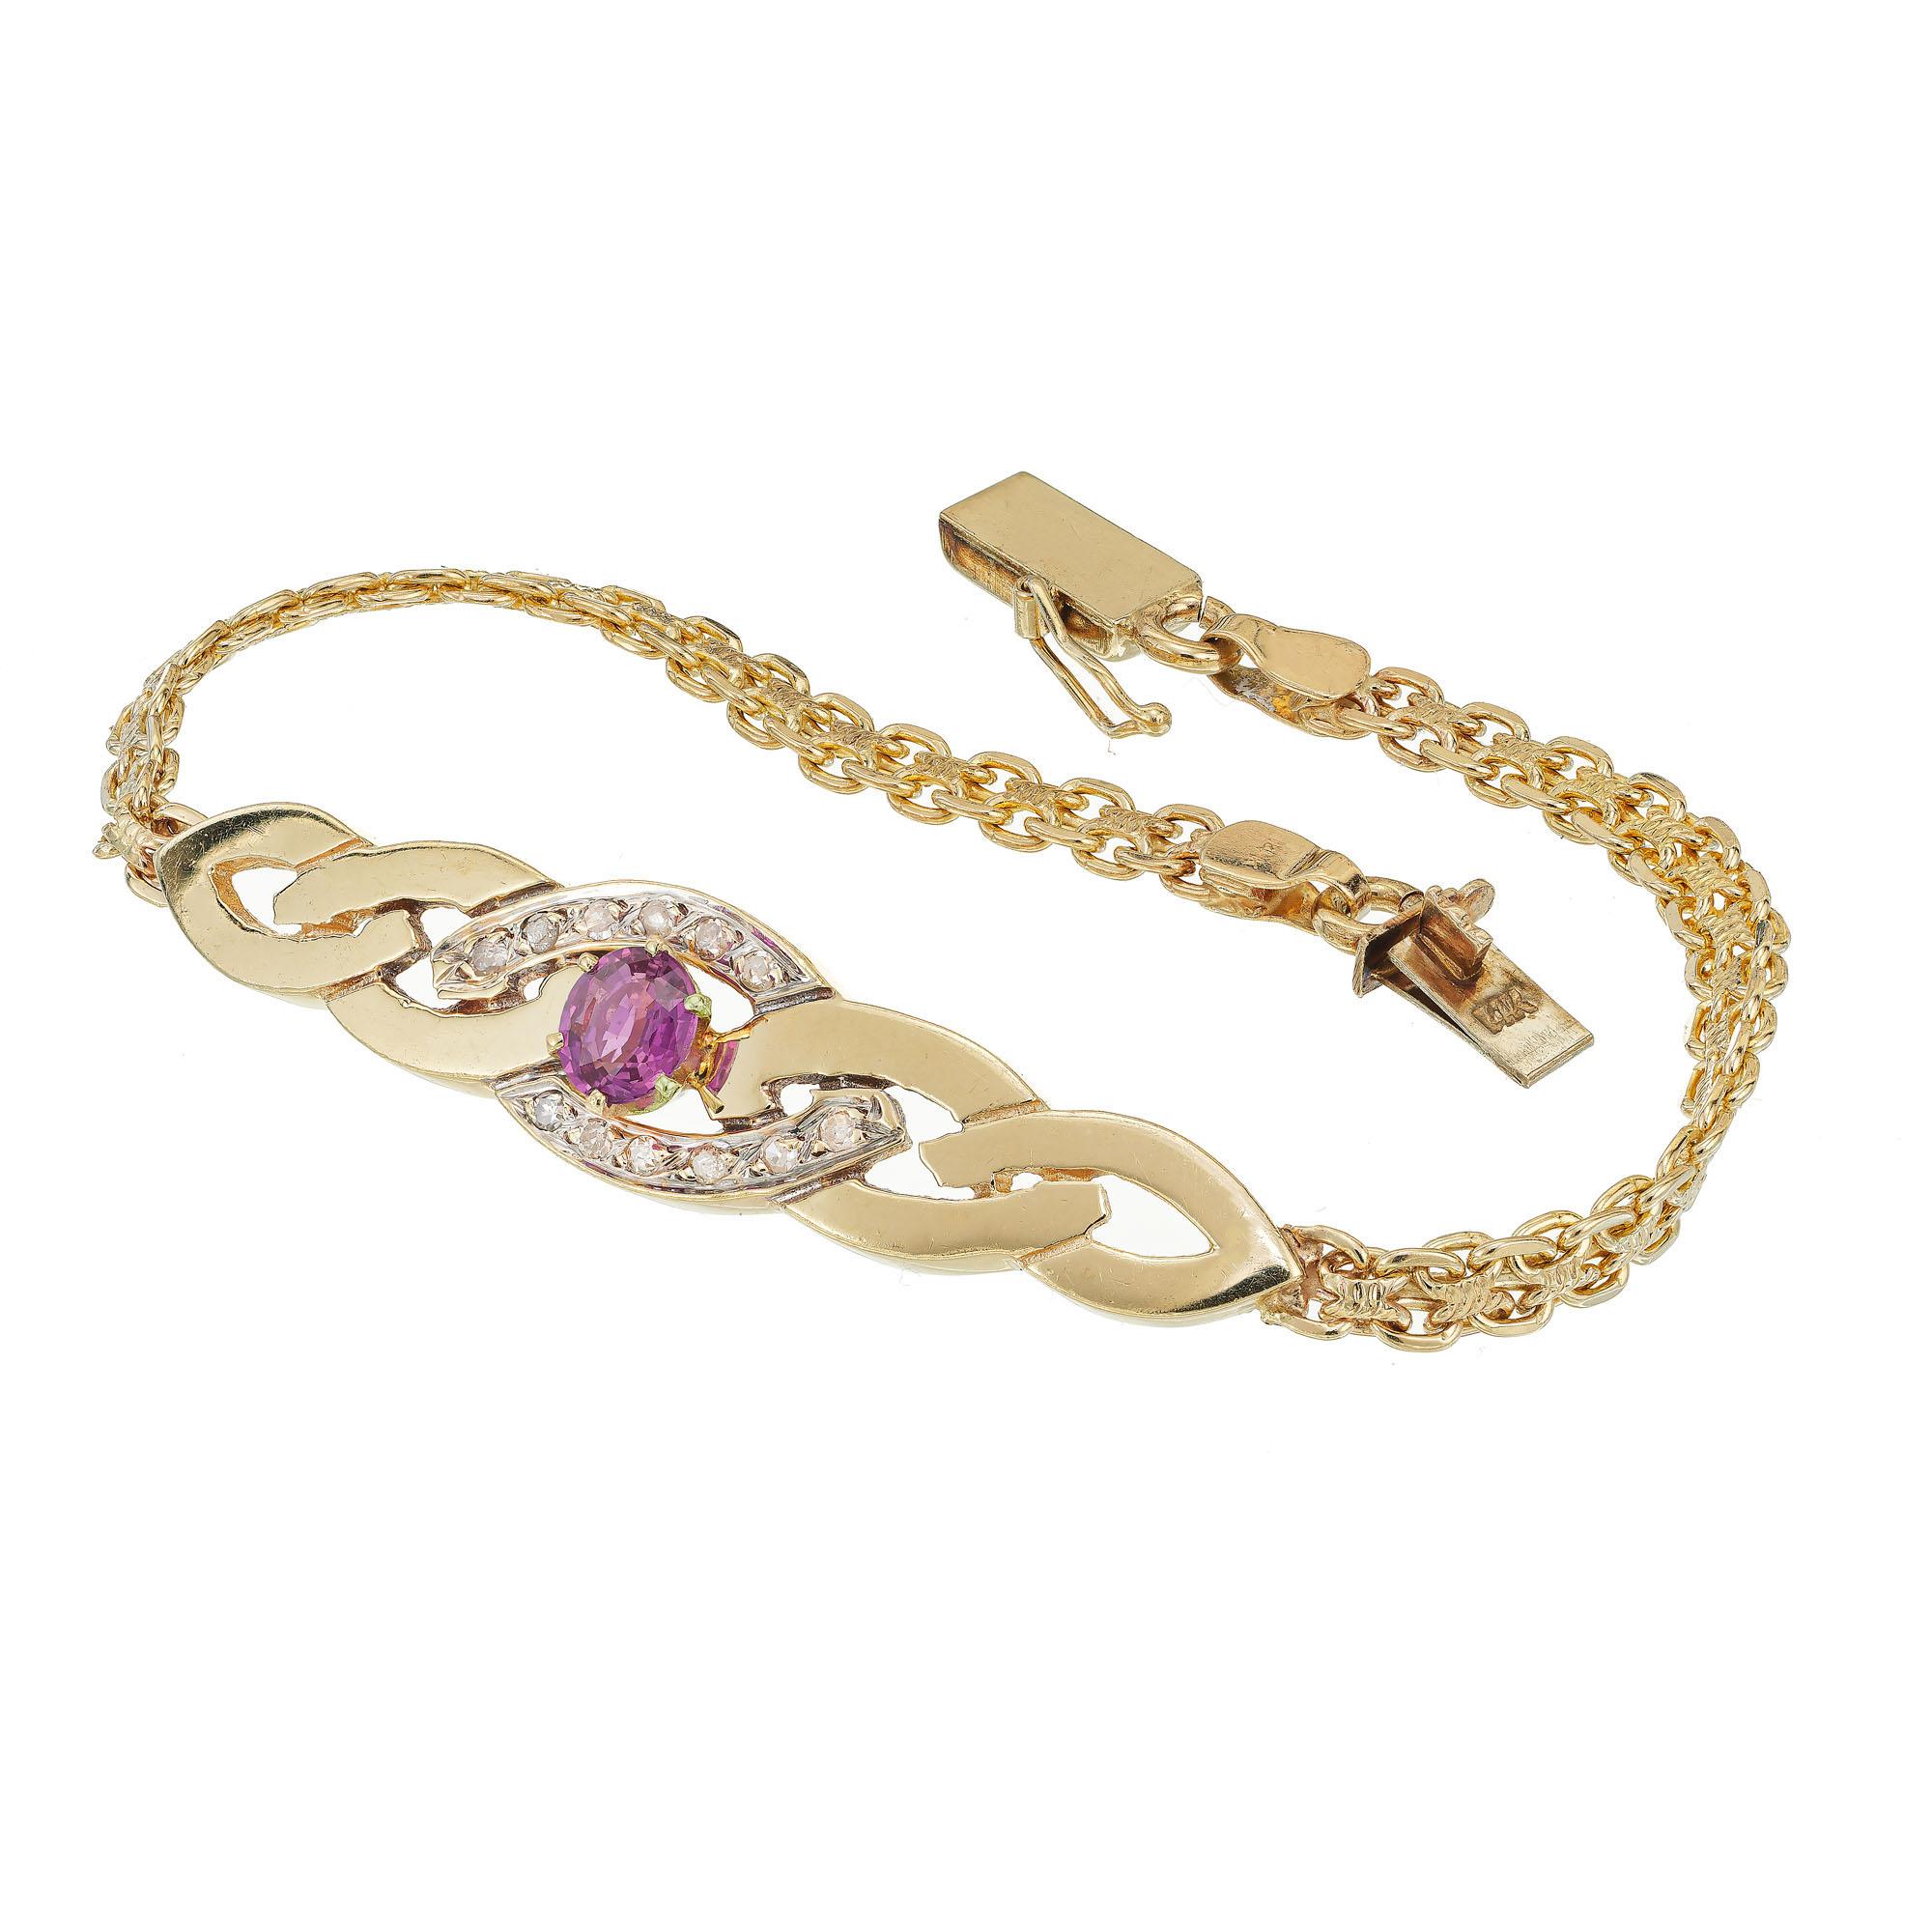 Pink Tourmaline and diamond bracelet. Swirl design center plaque, with 12 round accent diamonds with a 14k yellow gold Bismark style chain with box catch and safety. 6.5 inches. 

1 round pink Tourmaline approx. total weight .65cts
12 round diamonds